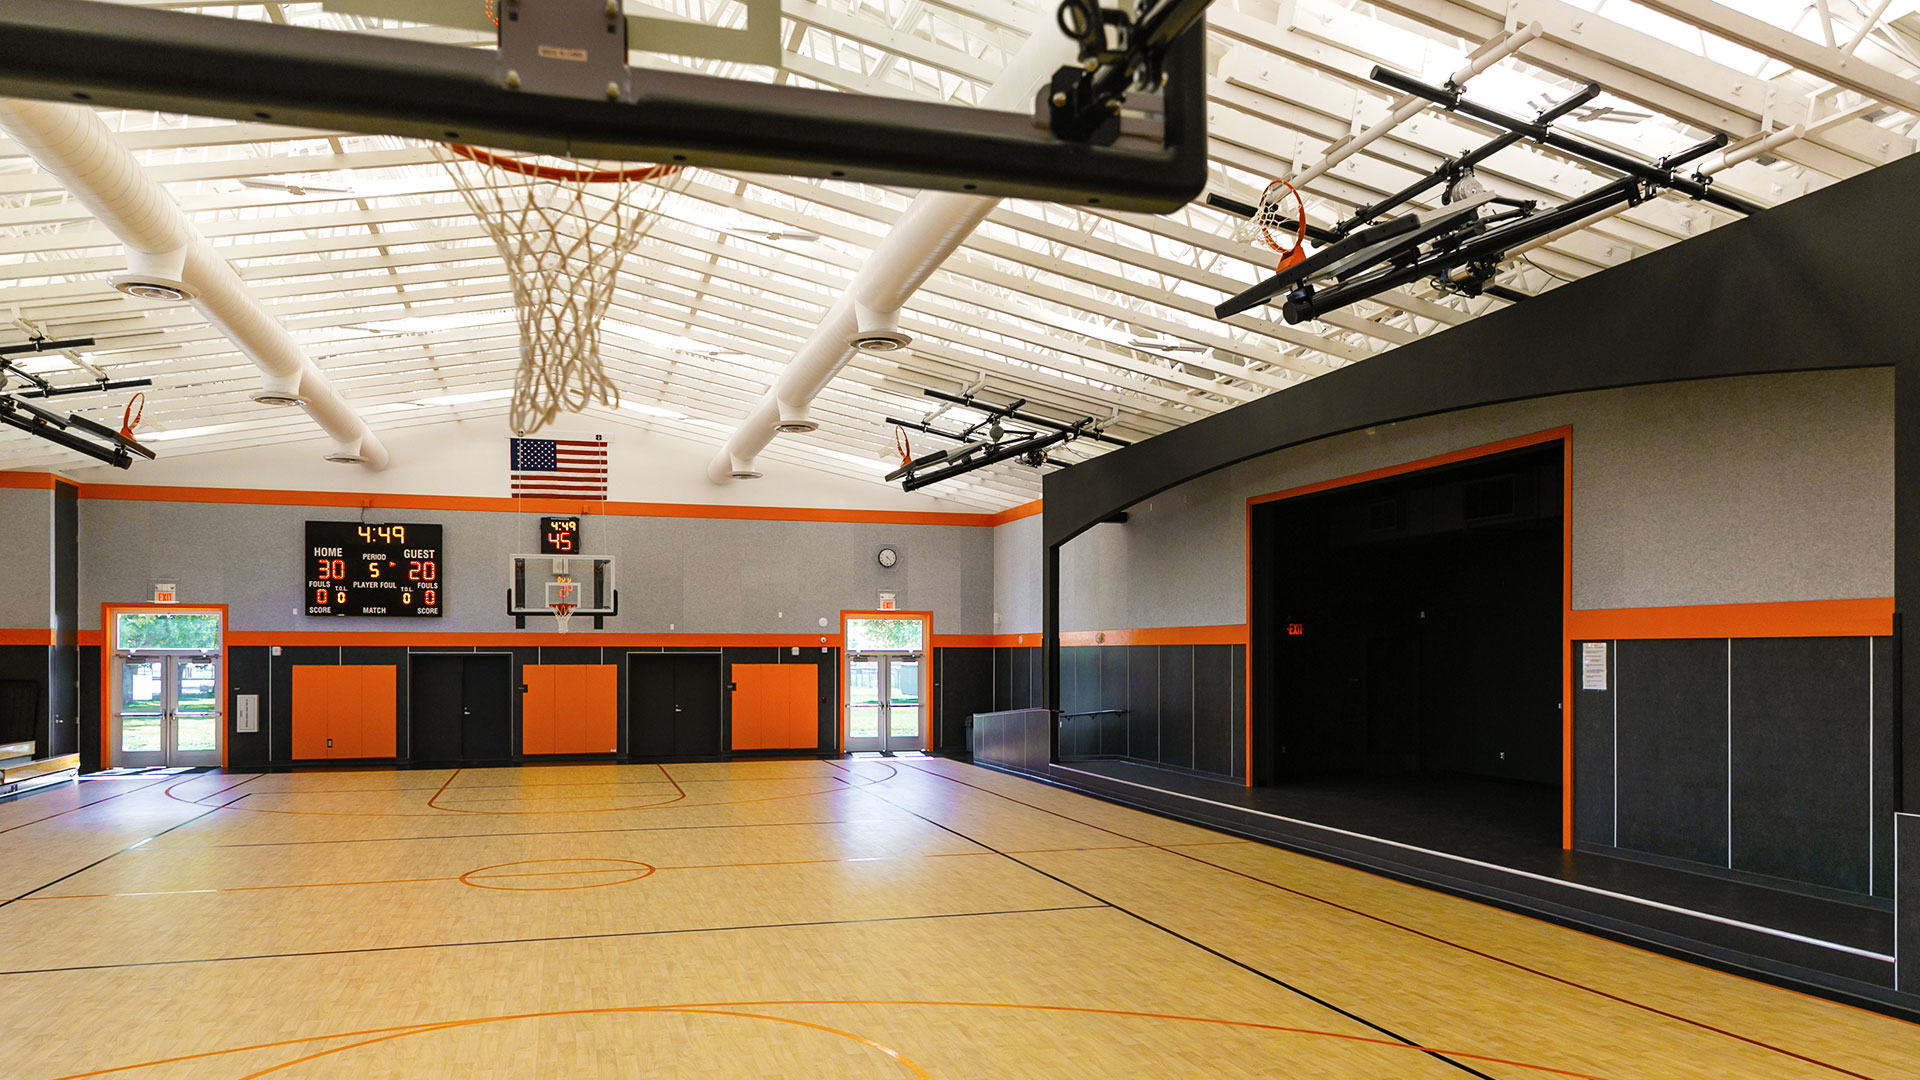 Interior of gym. Gray walls, black wainscot, and orange trim. Basketball court under white roof and trusses.